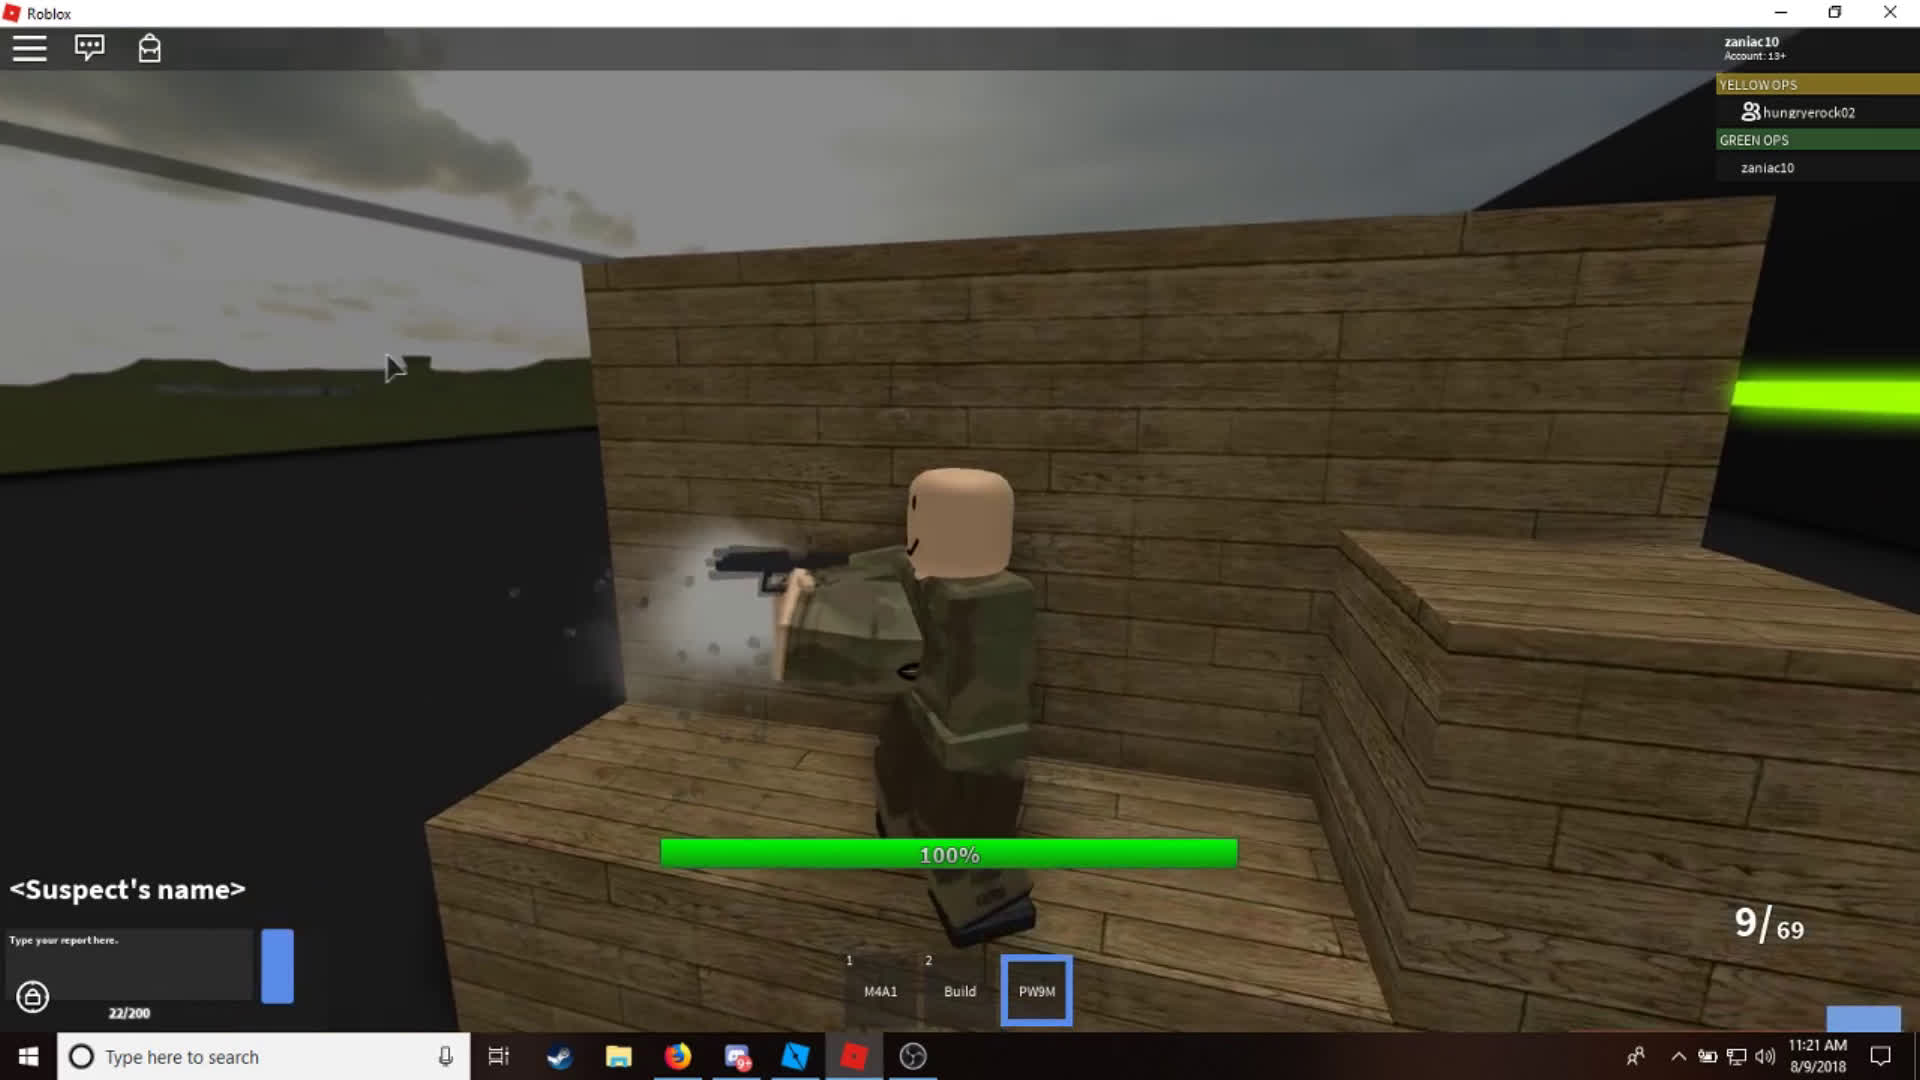 Me And Friends Have Been Making A Game Inspired By The Old Game Warfare It S Called Deltashock And We Ve Been Working On It Since Around 4 Days Ago Here Is Some Of - roblox how to build a game with friends